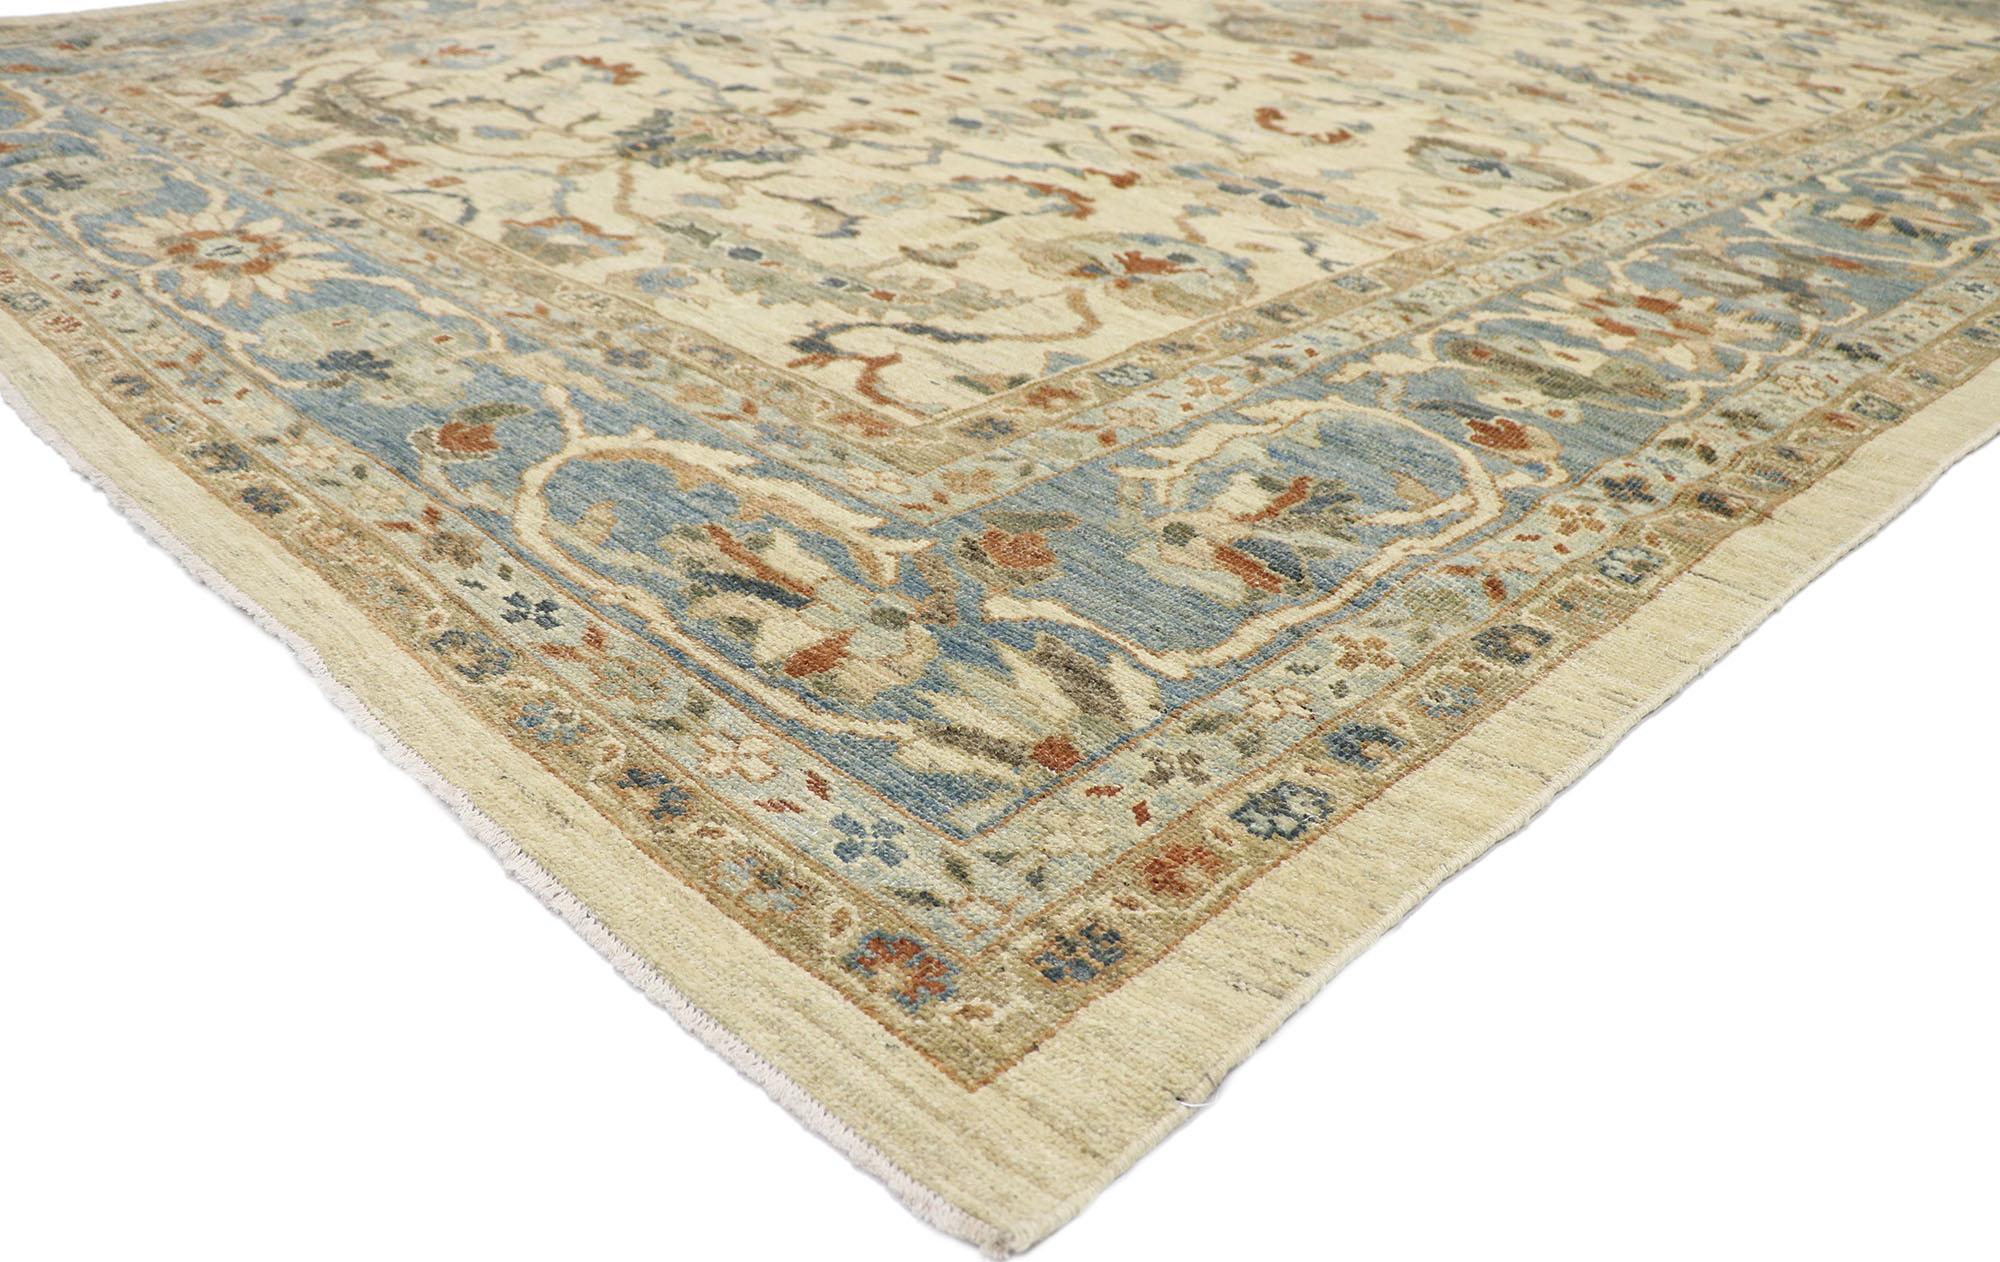 60915 new contemporary Persian Sultanabad rug with Modern Transitional style 10'00 x 14'03. This hand-knotted wool contemporary Persian Sultanabad rug features an all-over botanical trellis pattern spread across an abrashed sand-beige field. An